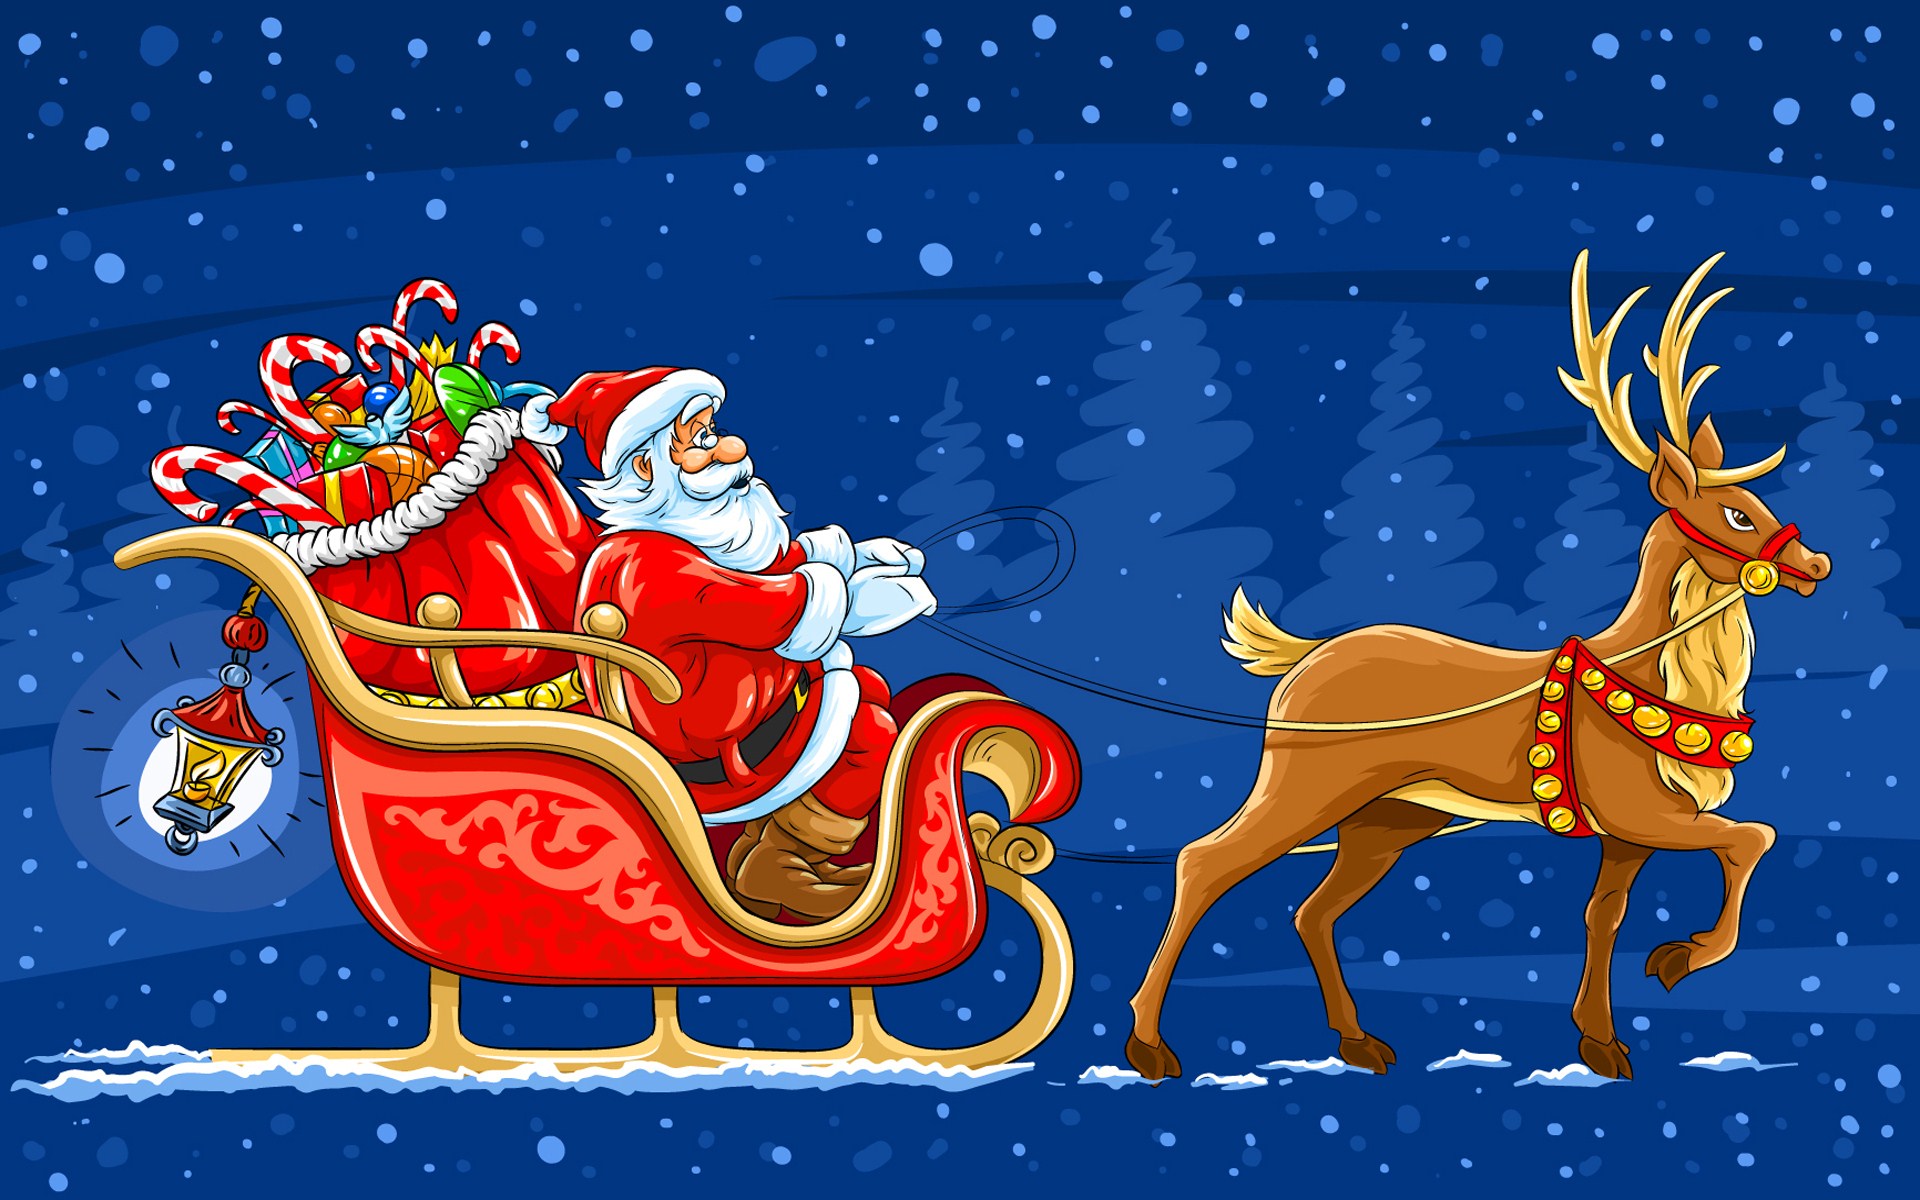 Santa Claus Moving On The Sledge With Reindeer And